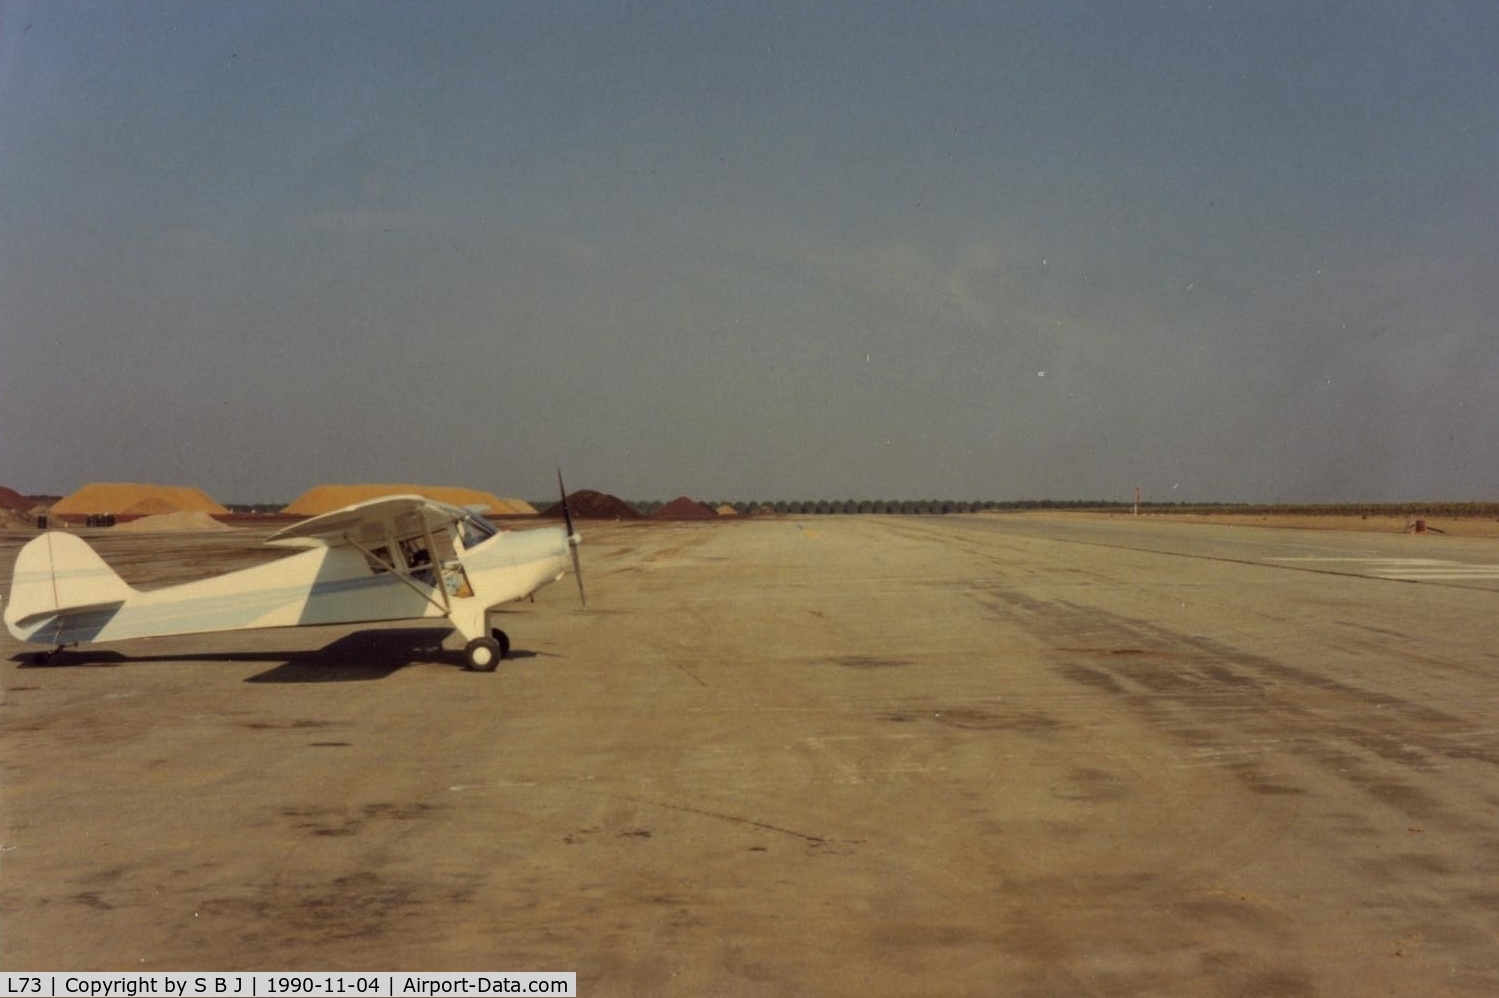 Poso-kern County Airport (L73) - 39932 at Poso Kern airport in 1990. Not much there but nice runway. Nice place when the drag strip next door is active - I guess?